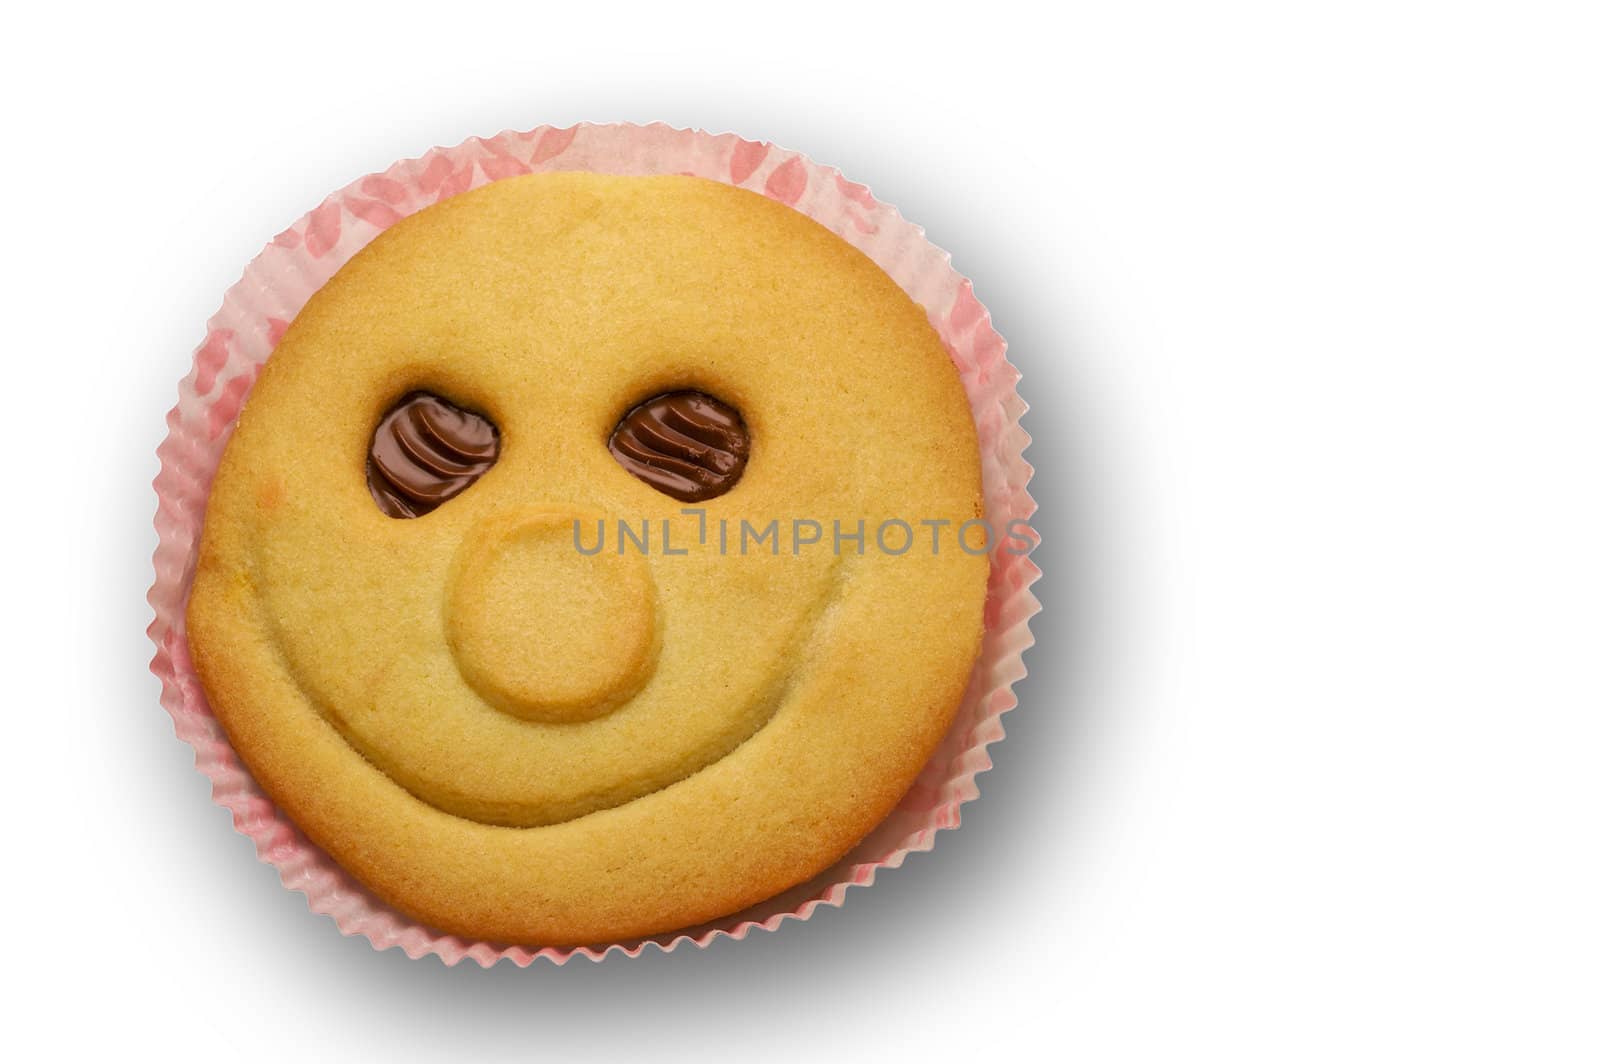 Chocolate filled optimistic pastry w/ clipping path